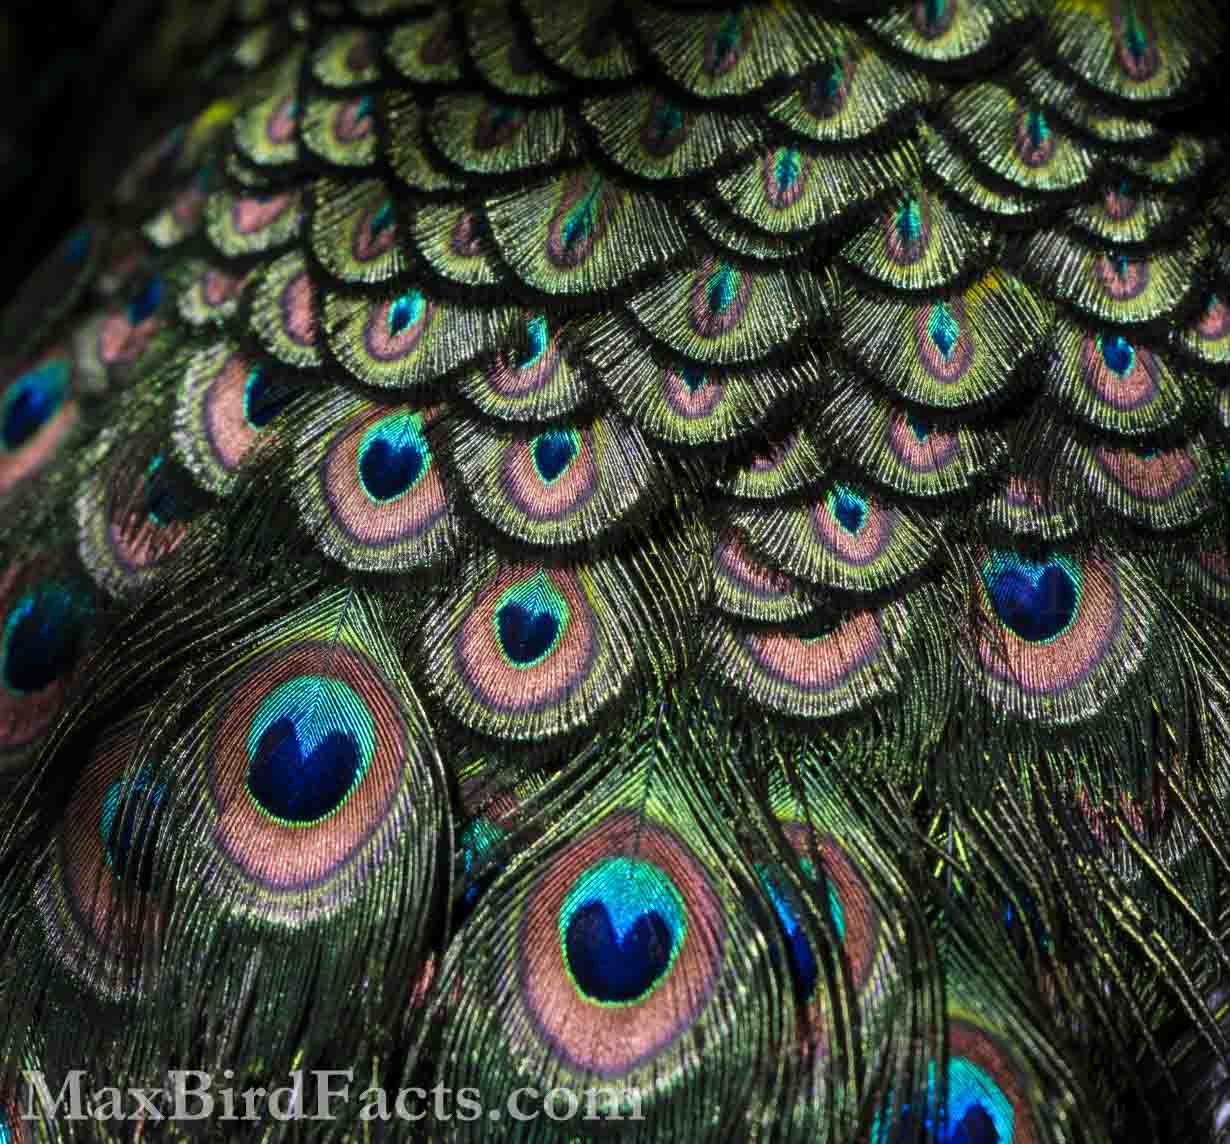 The Green Peafowl (Pavo muticus) is an endangered cousin to the much more common Indian Peafowl. Like its relative, the Green Peafowl uses these stunning tail feathers as part of its breeding display, and coherent scattering is the key to this astonishing appearance. (Scotland Neck, NC. 2023)